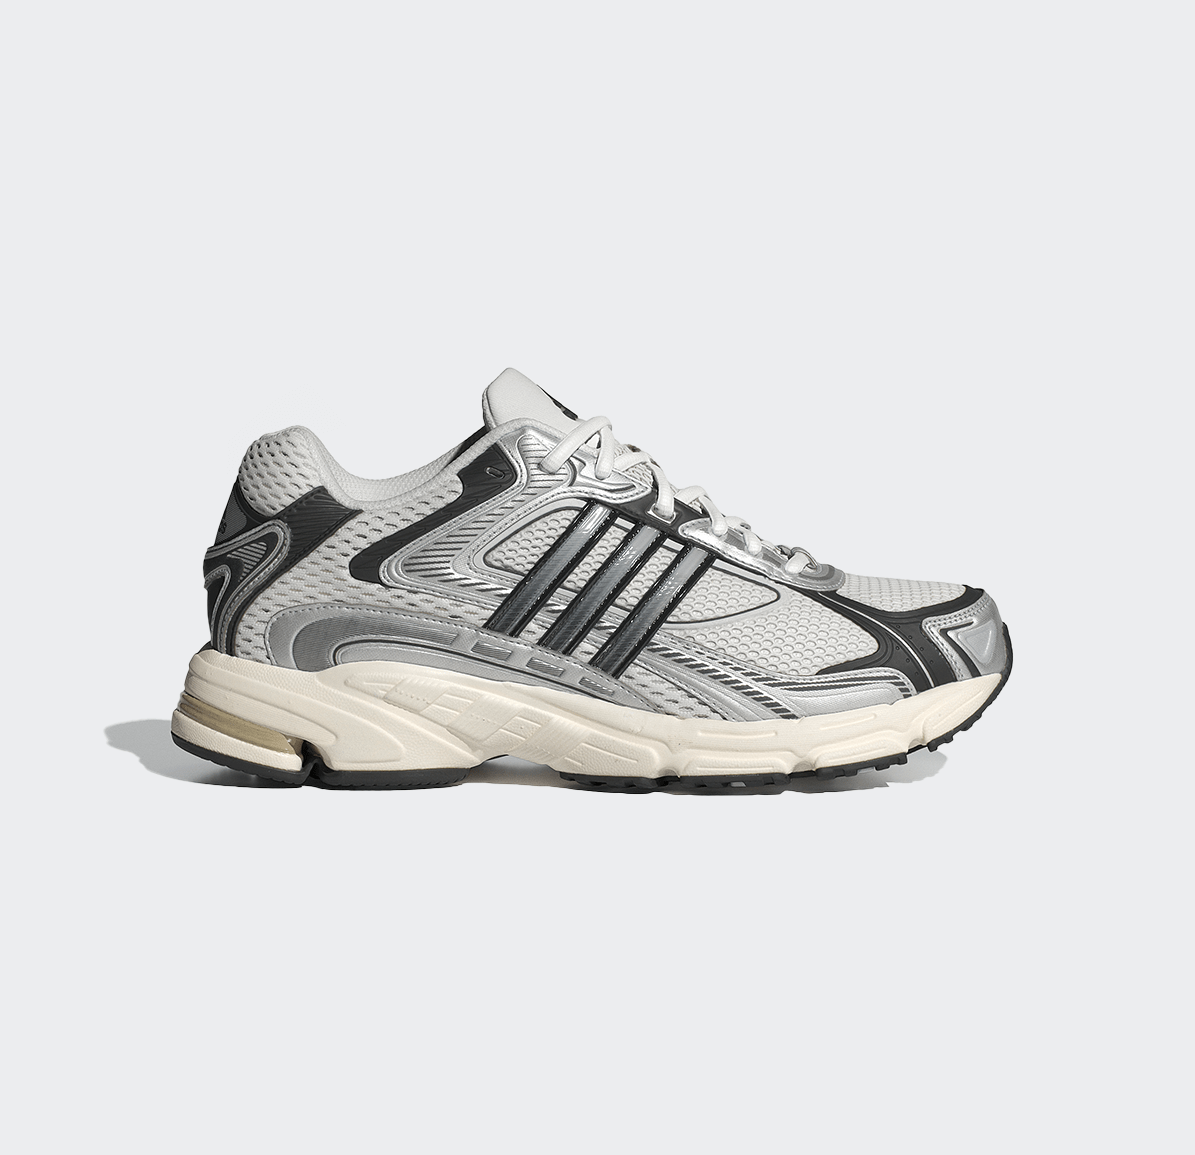 Adidas Response CL - Crystal White/Cloud White/Core Black - Adidas - State Of Play